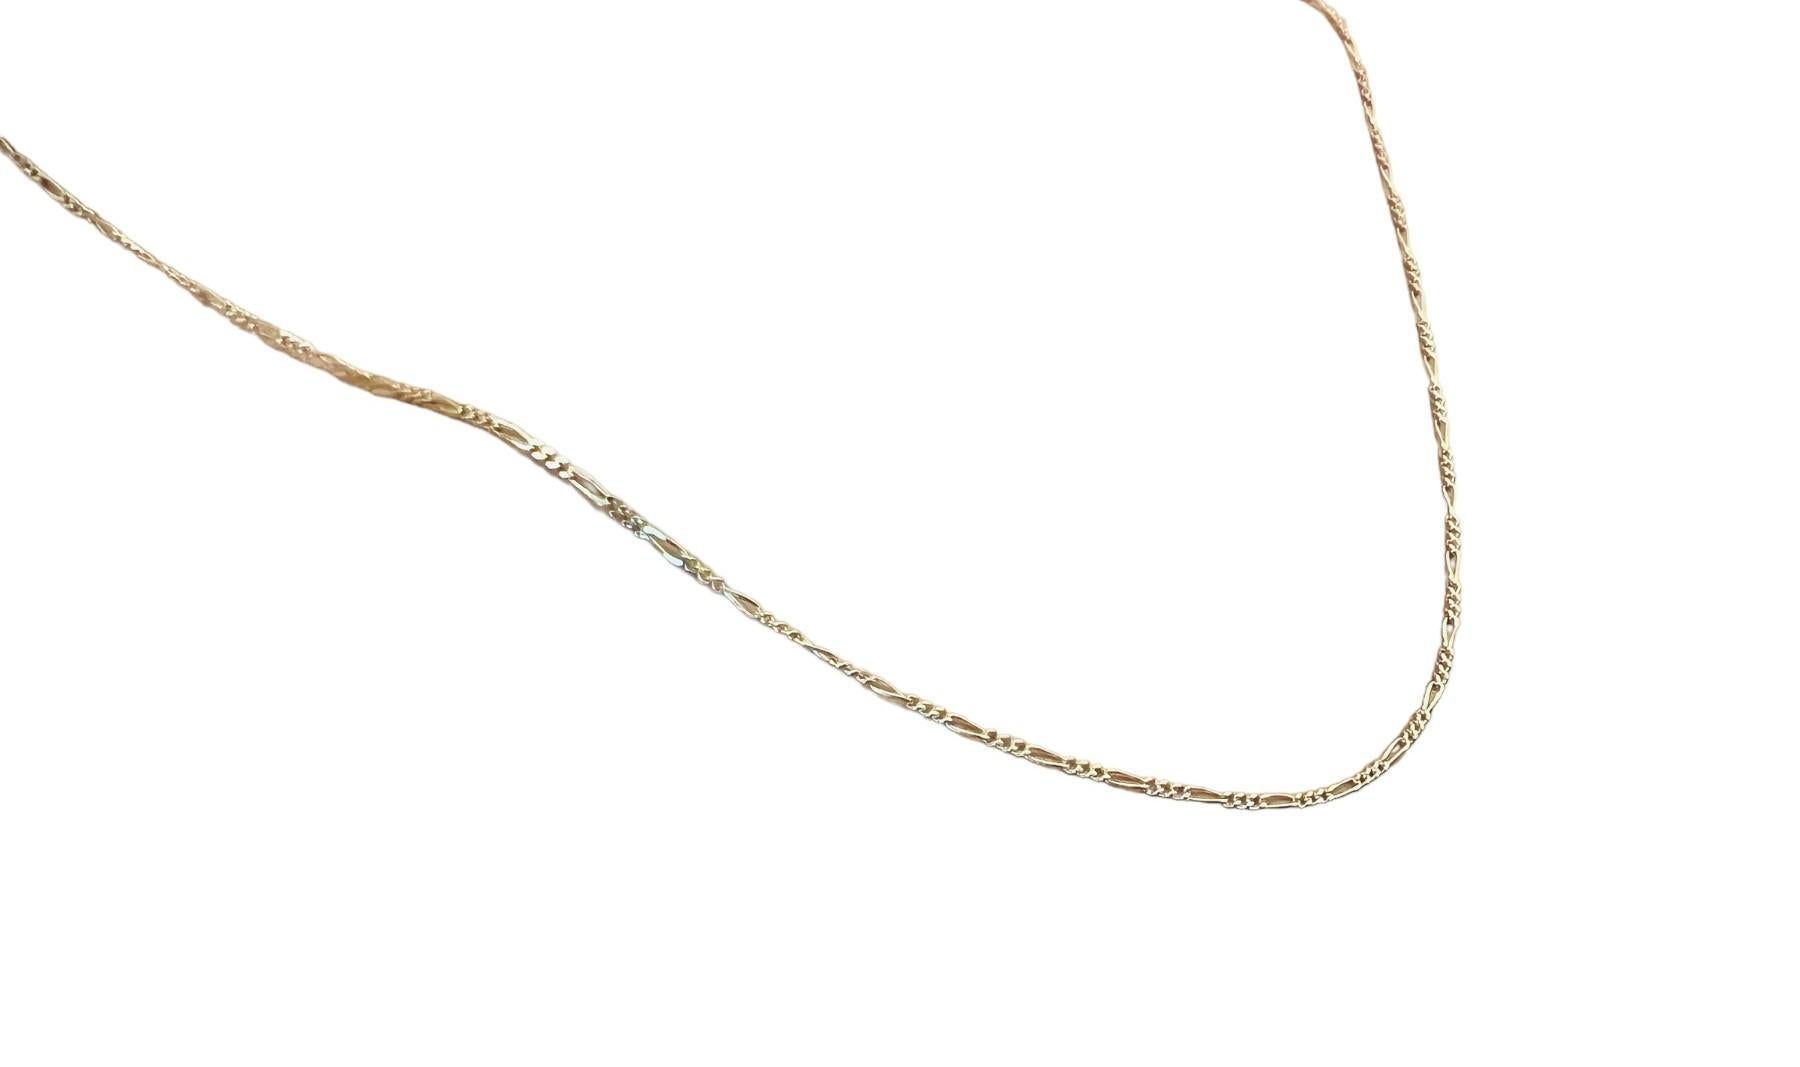 14K Yellow Gold Figaro Chain

This chain is set in 14K yellow gold and 21